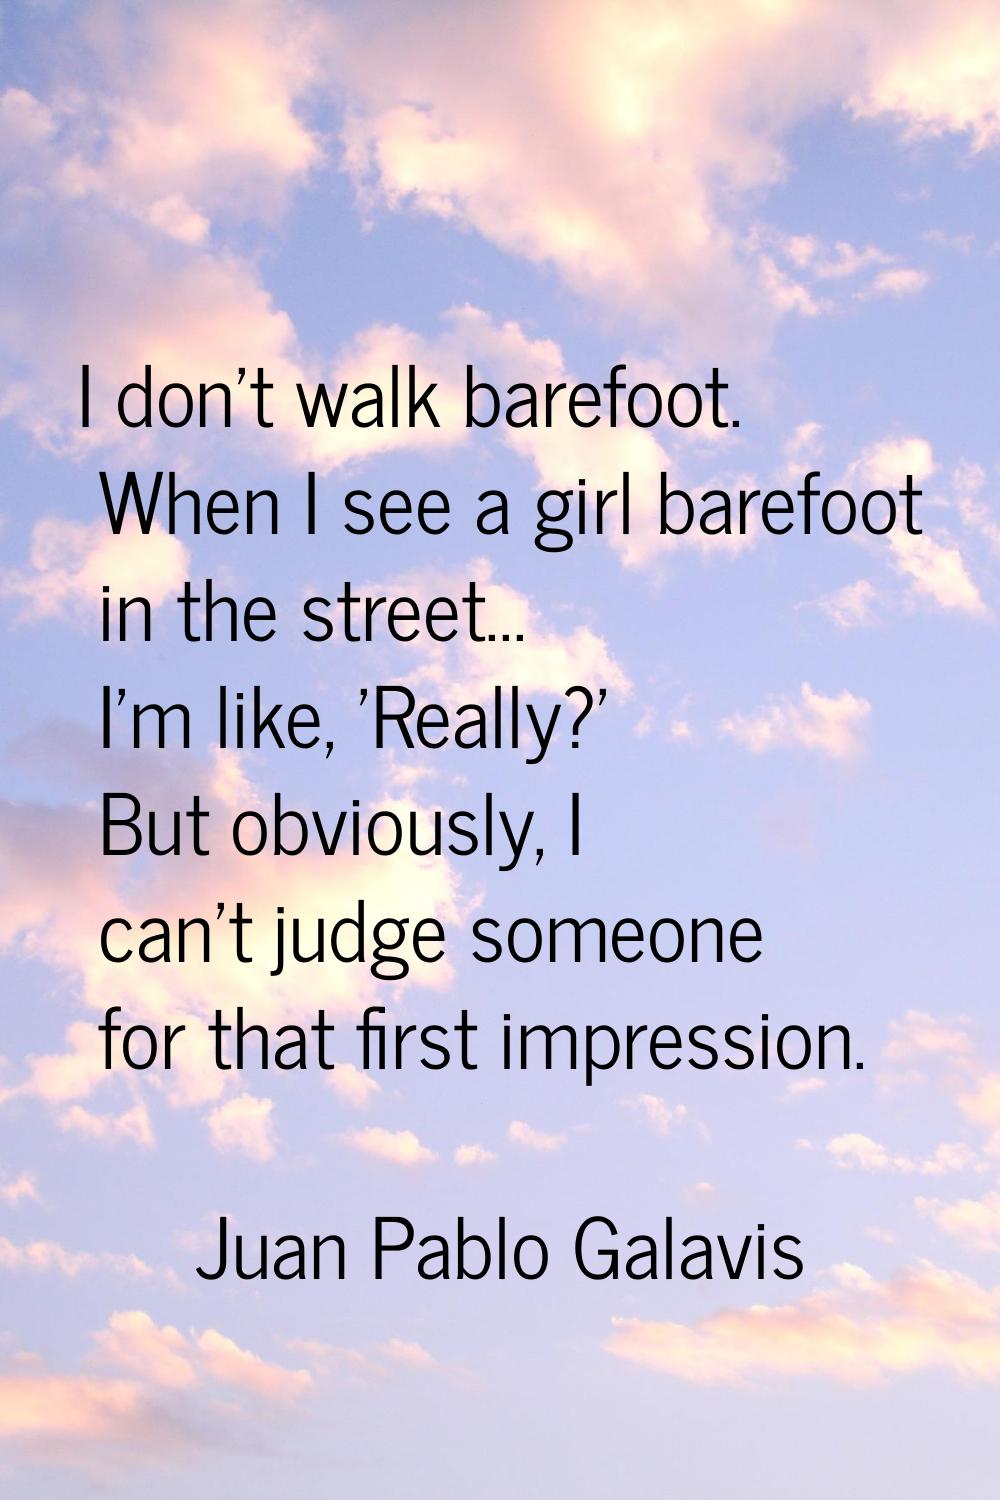 I don't walk barefoot. When I see a girl barefoot in the street... I'm like, 'Really?' But obviousl